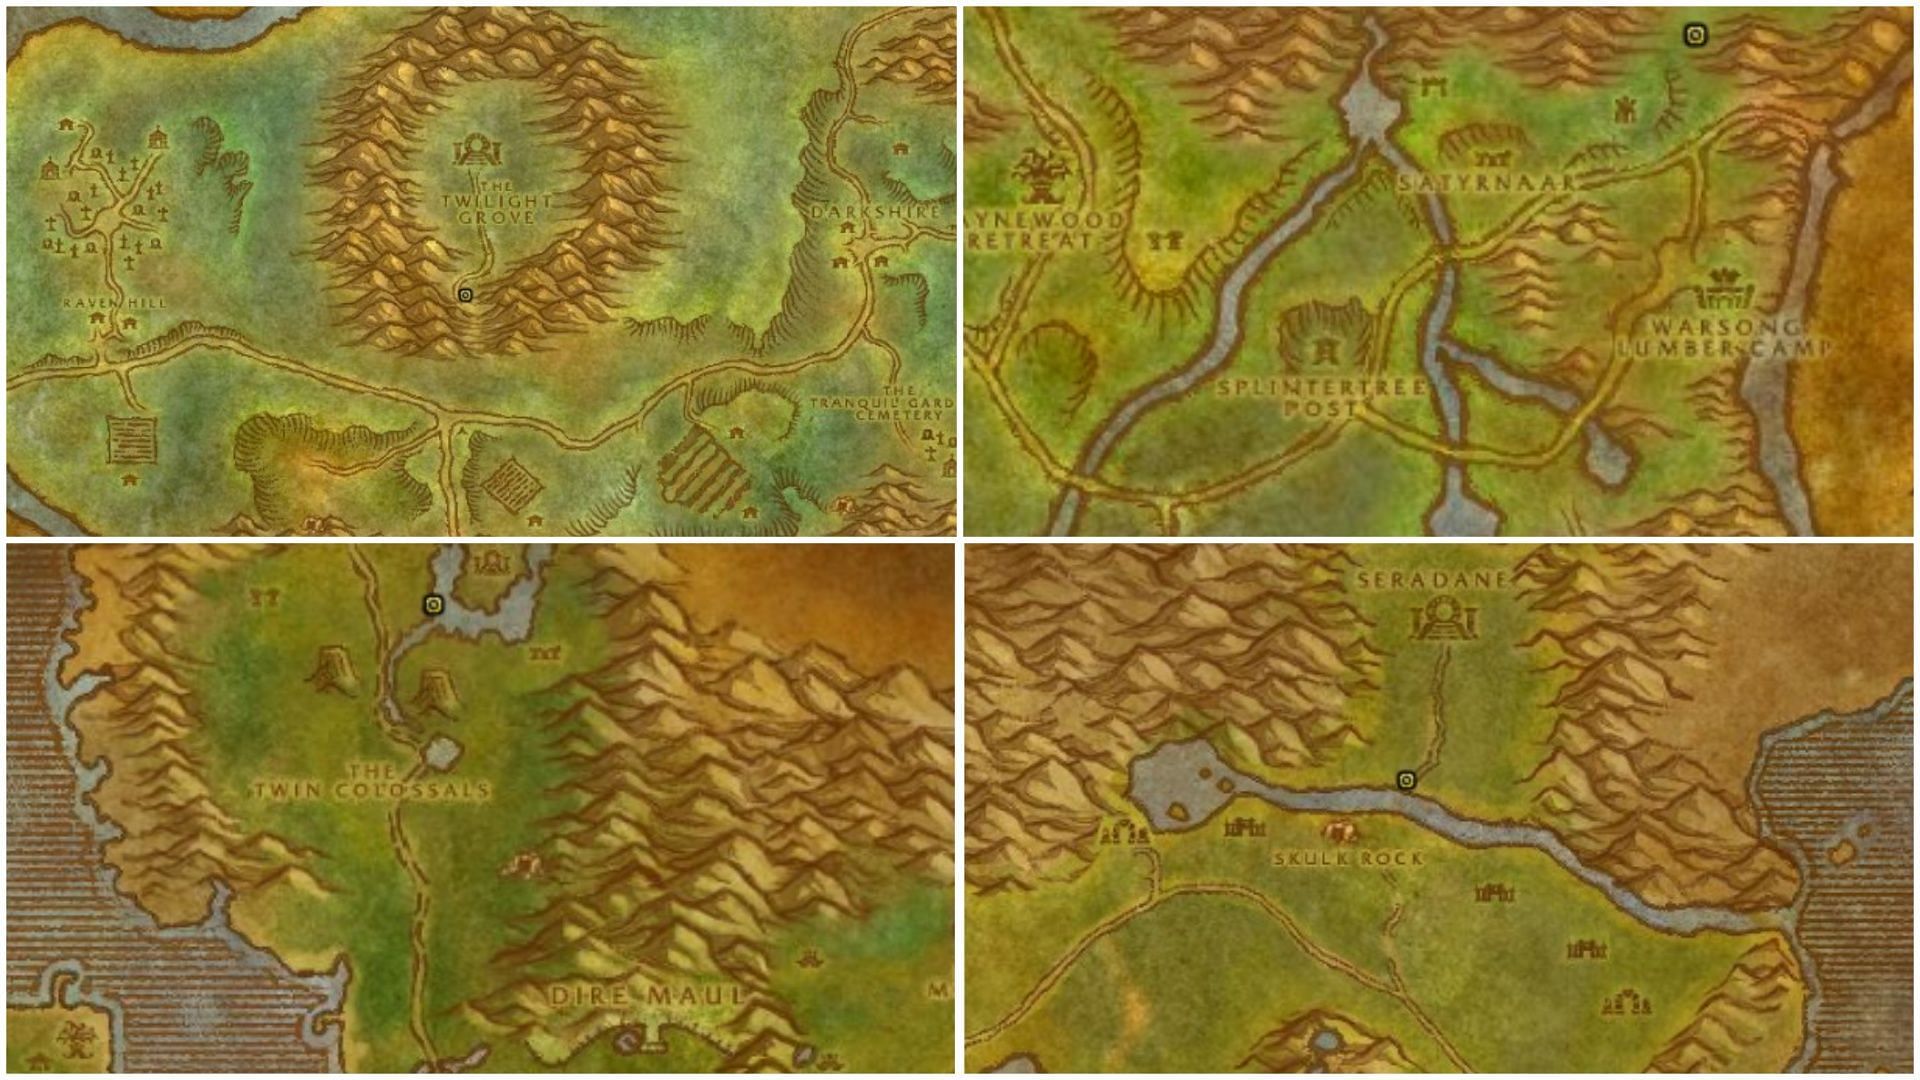 Locations of the Nightmare Incusions: Duskwood, Ashenvale, Feralas, and The Hinterlands (Image via Blizzard Entertainment)